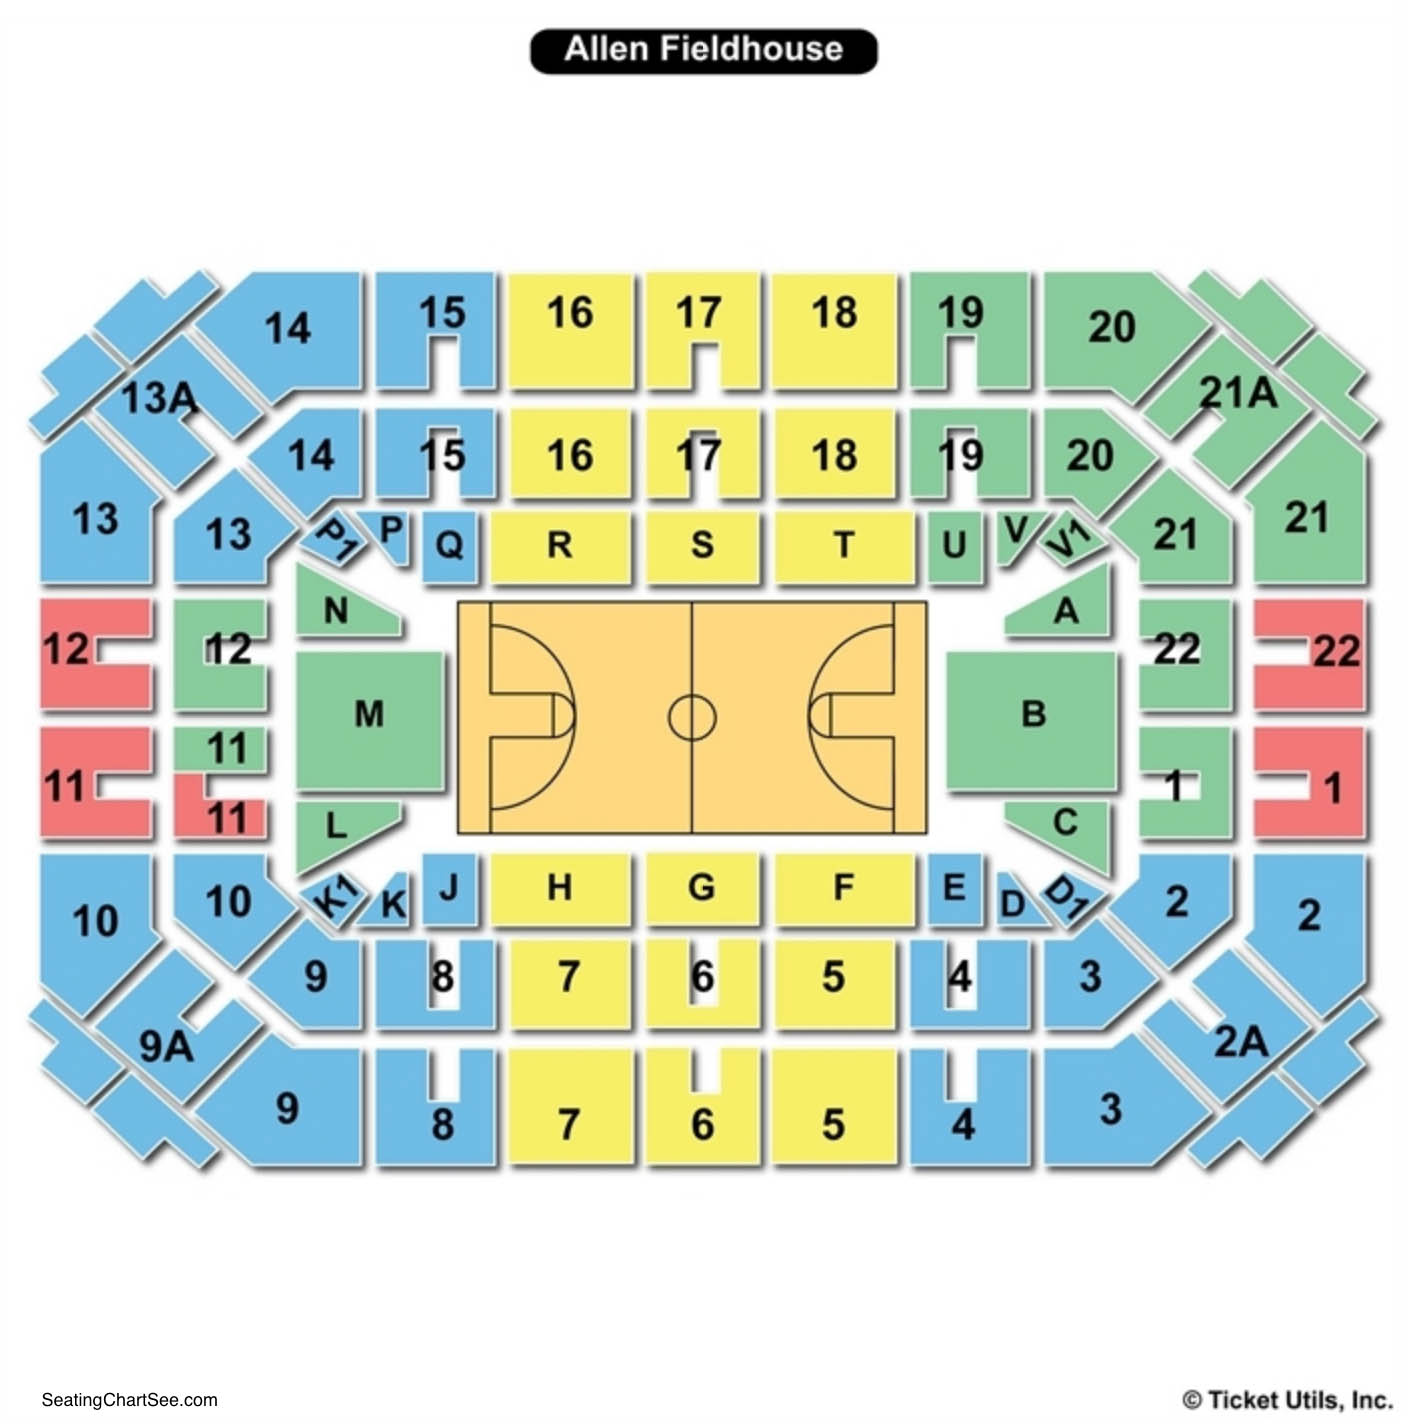 Allen Fieldhouse Seating Charts Views